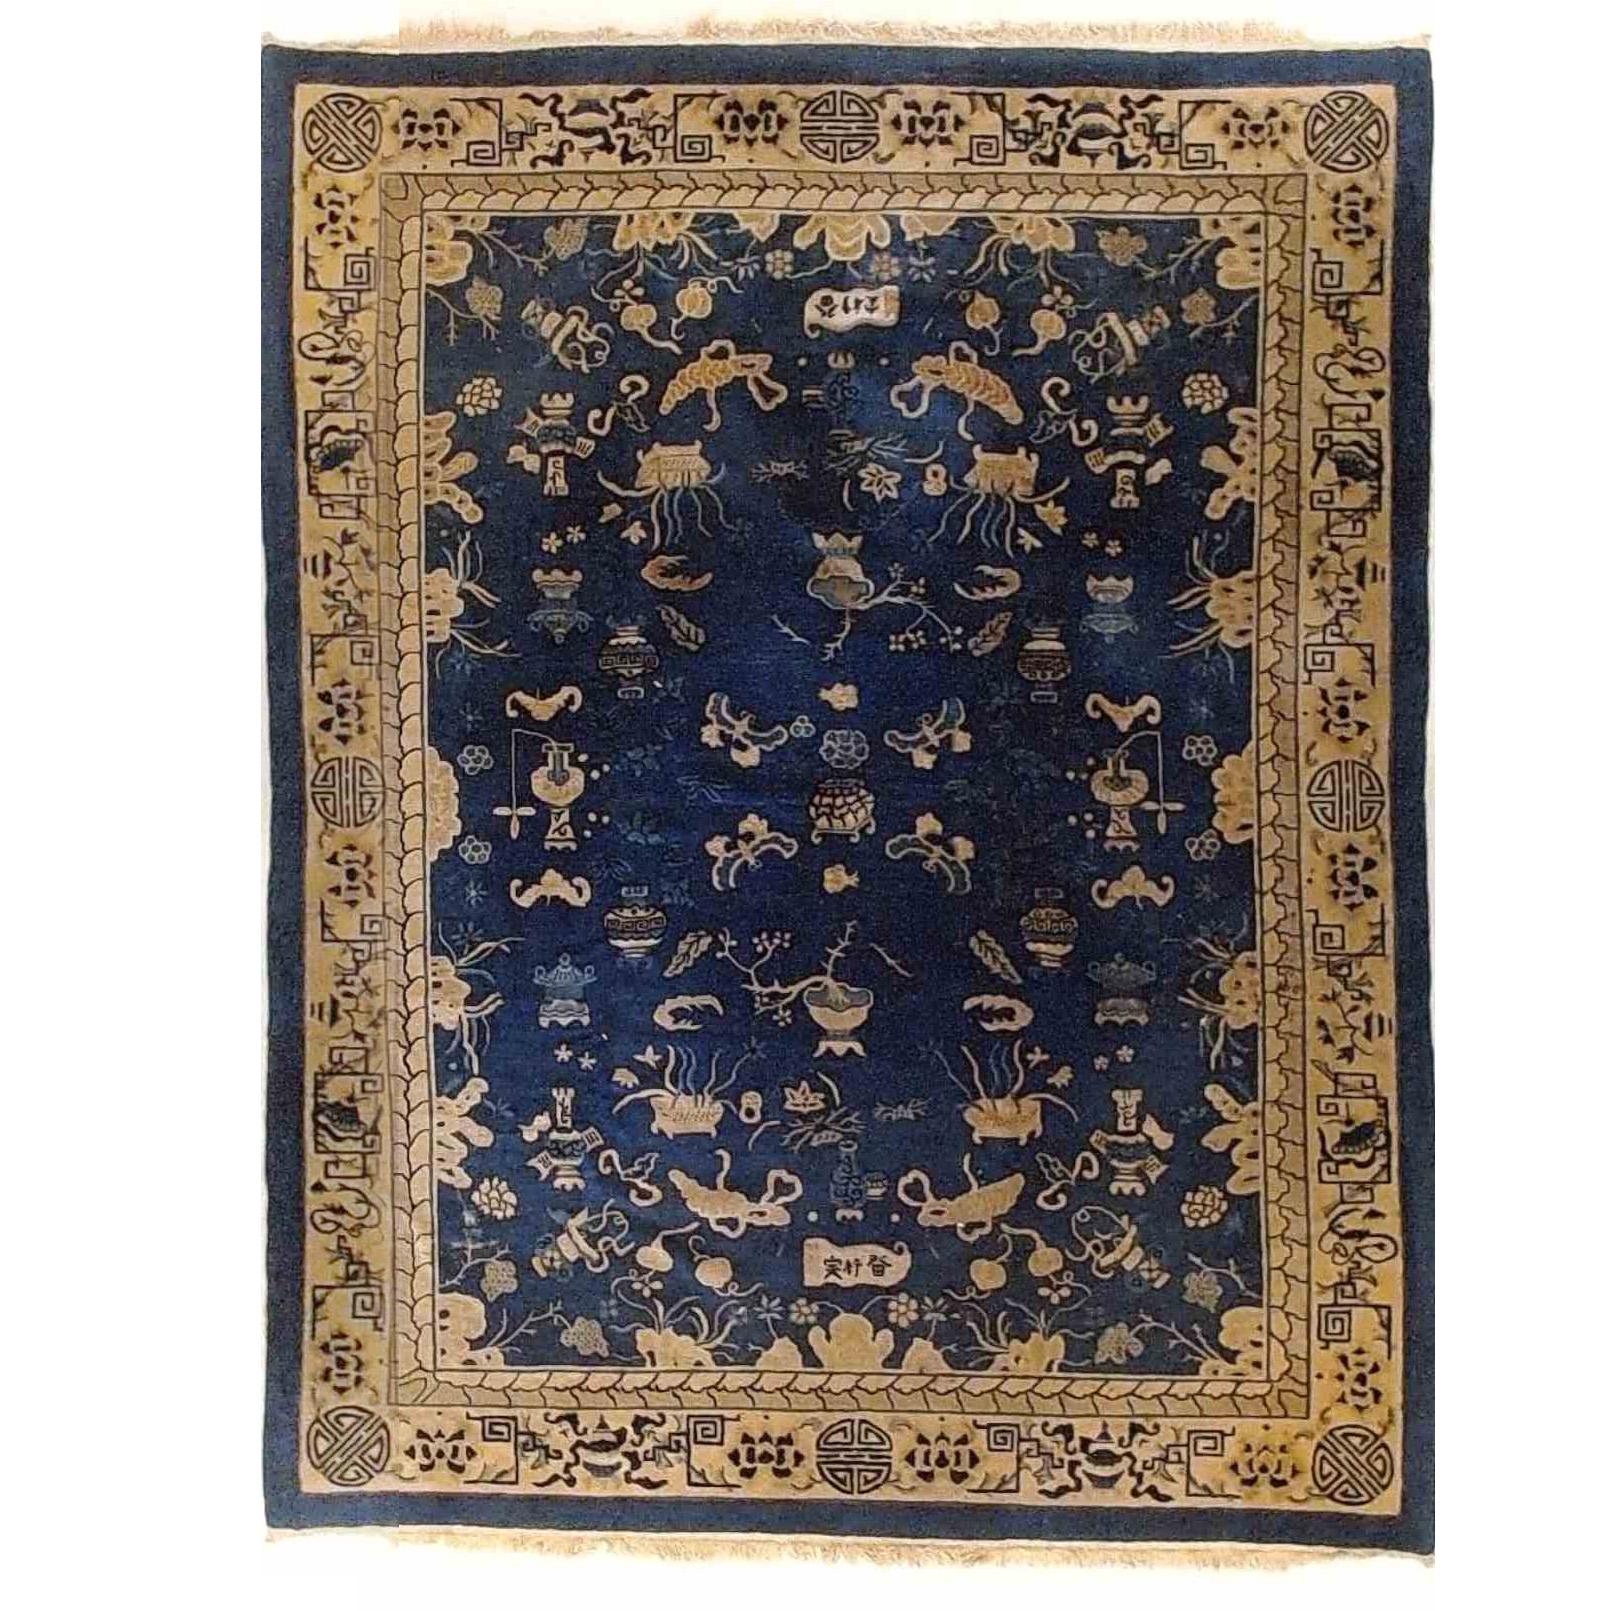 An antique Chinese Peking oriental rug offers wool construction with detached garden elements throughout, circa 1910

Measures - 127